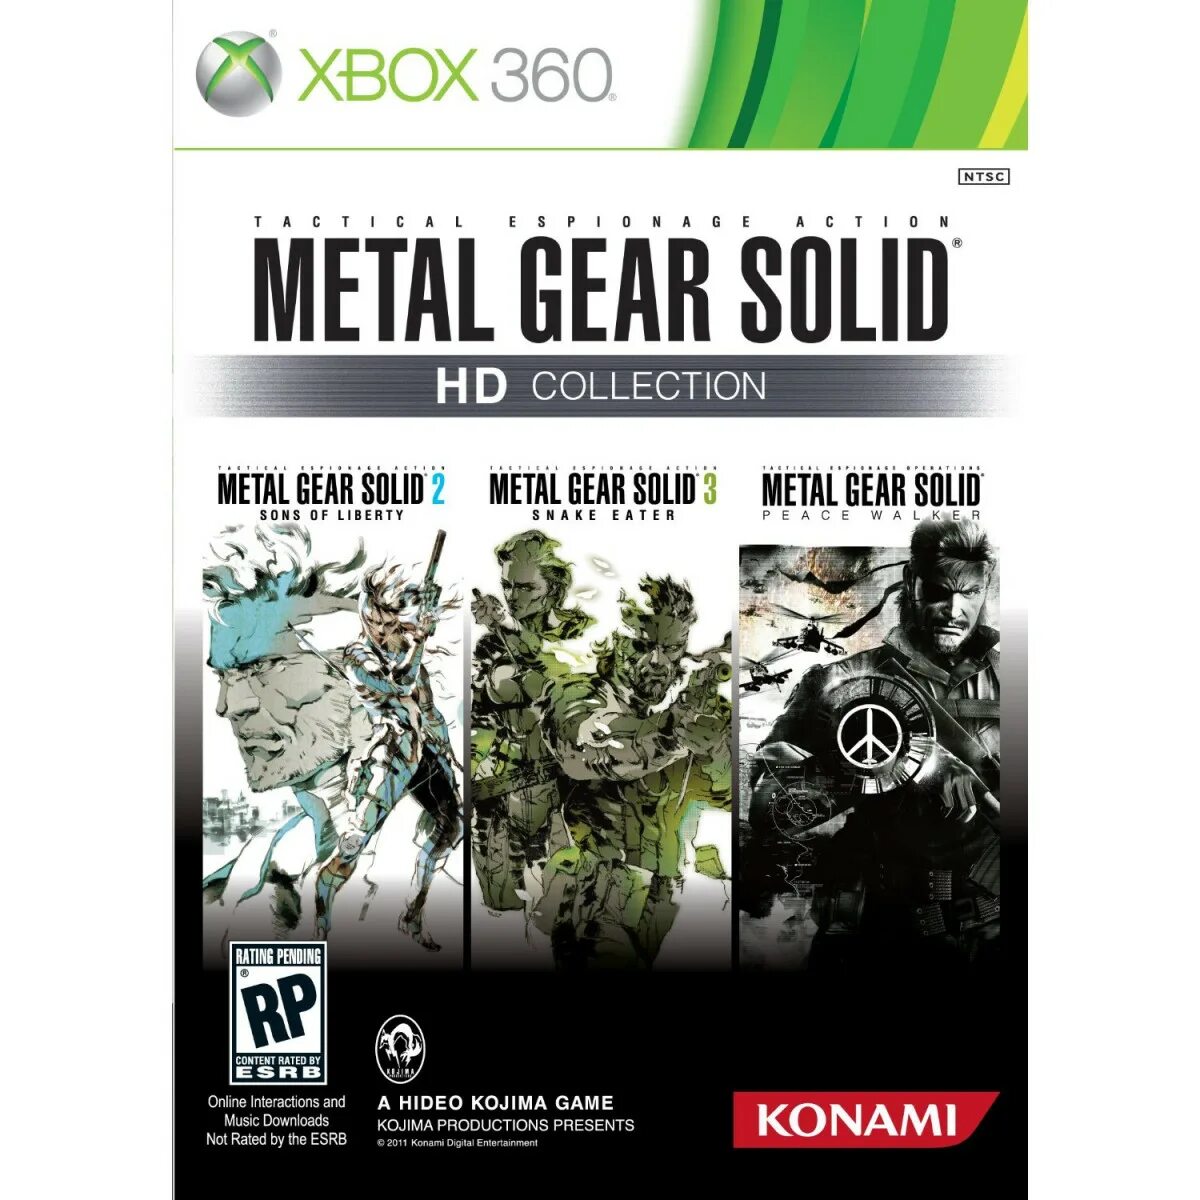 Xbox 360 collection. Metal Gear Solid 3 Xbox 360. MGS collection Xbox 360. Metal Gear Xbox 360.